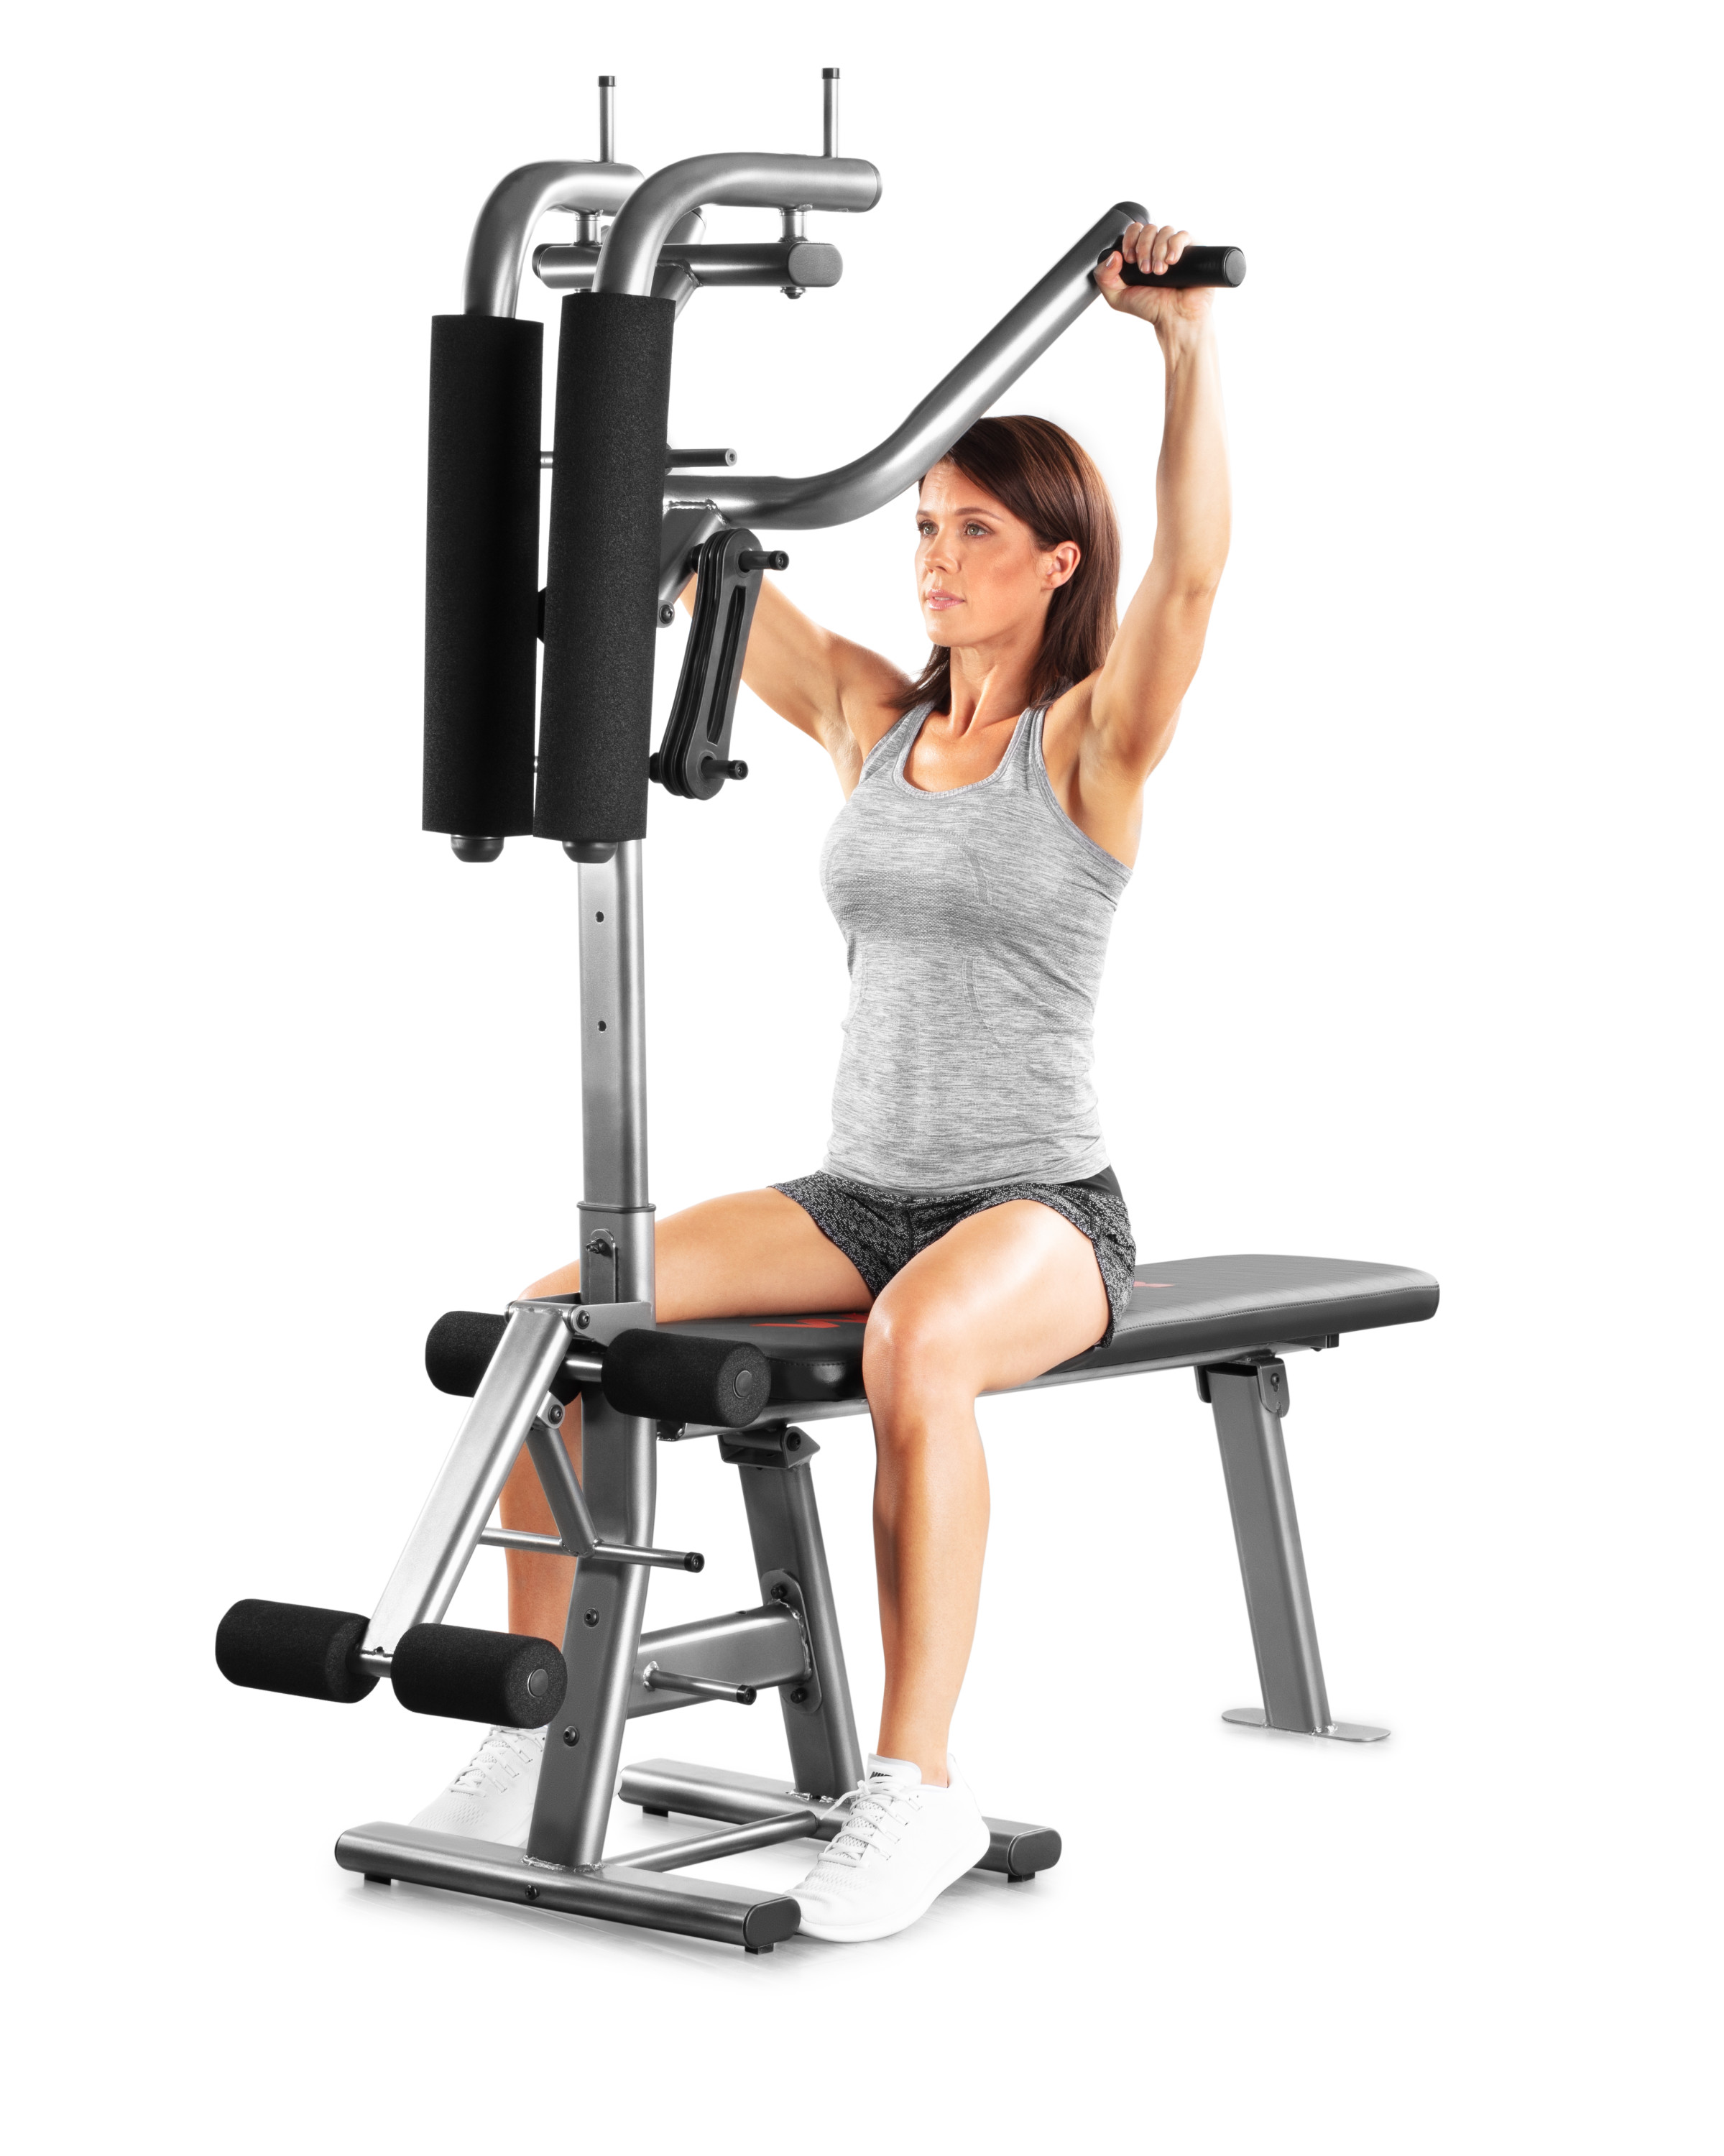 Weider Flex CTS Home Gym System with 14 Resistance Bands and Professionally-Designed Excercise Chart - image 6 of 11